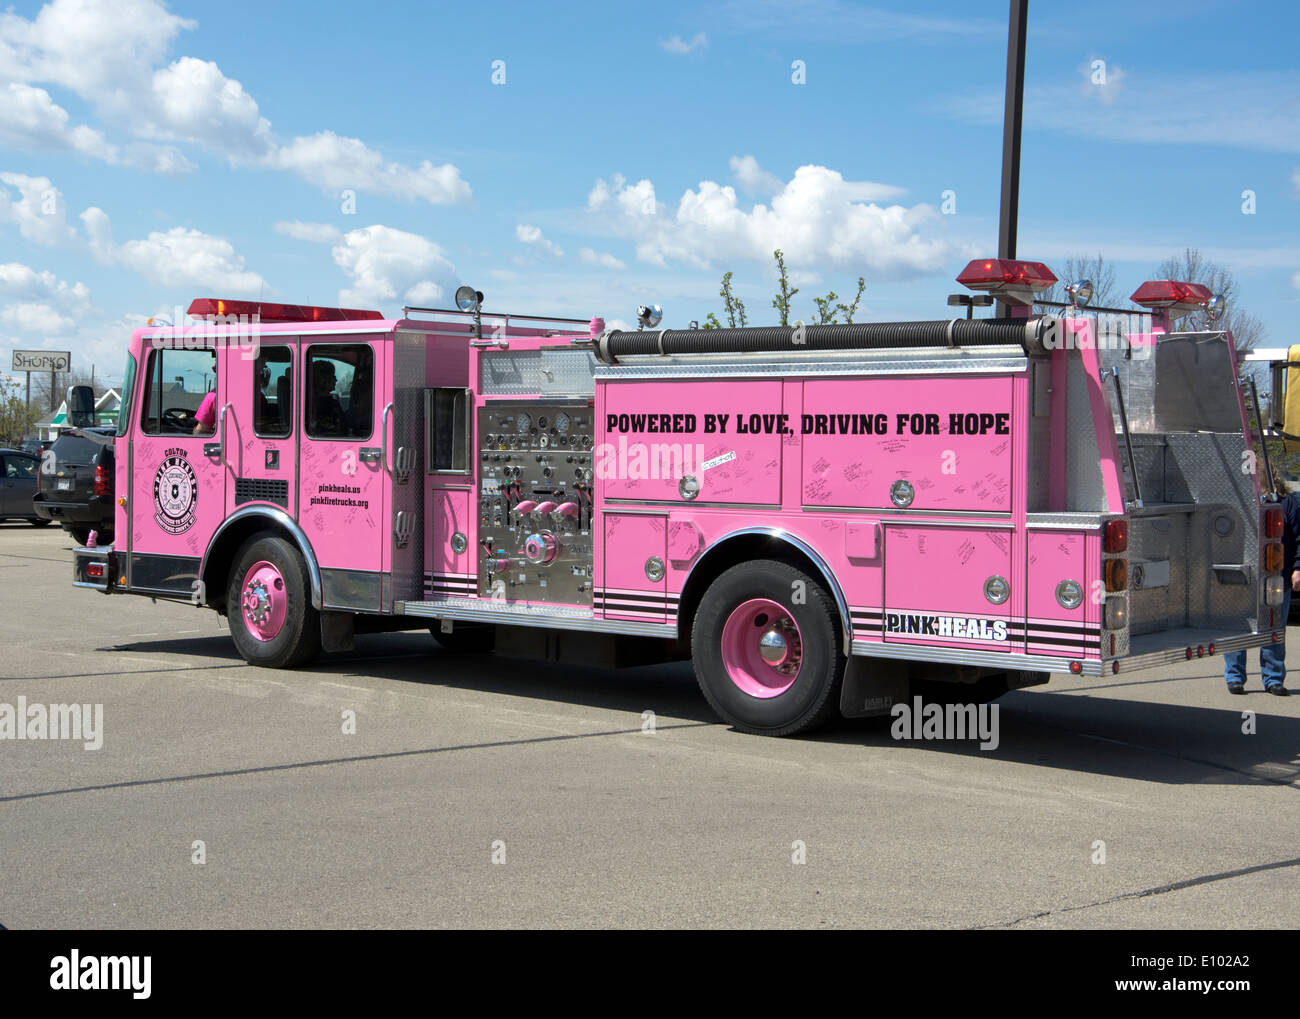 Pink fire truck, symbol for Pink Heals charitable fund raising and support organization for cancer patients Stock Photo